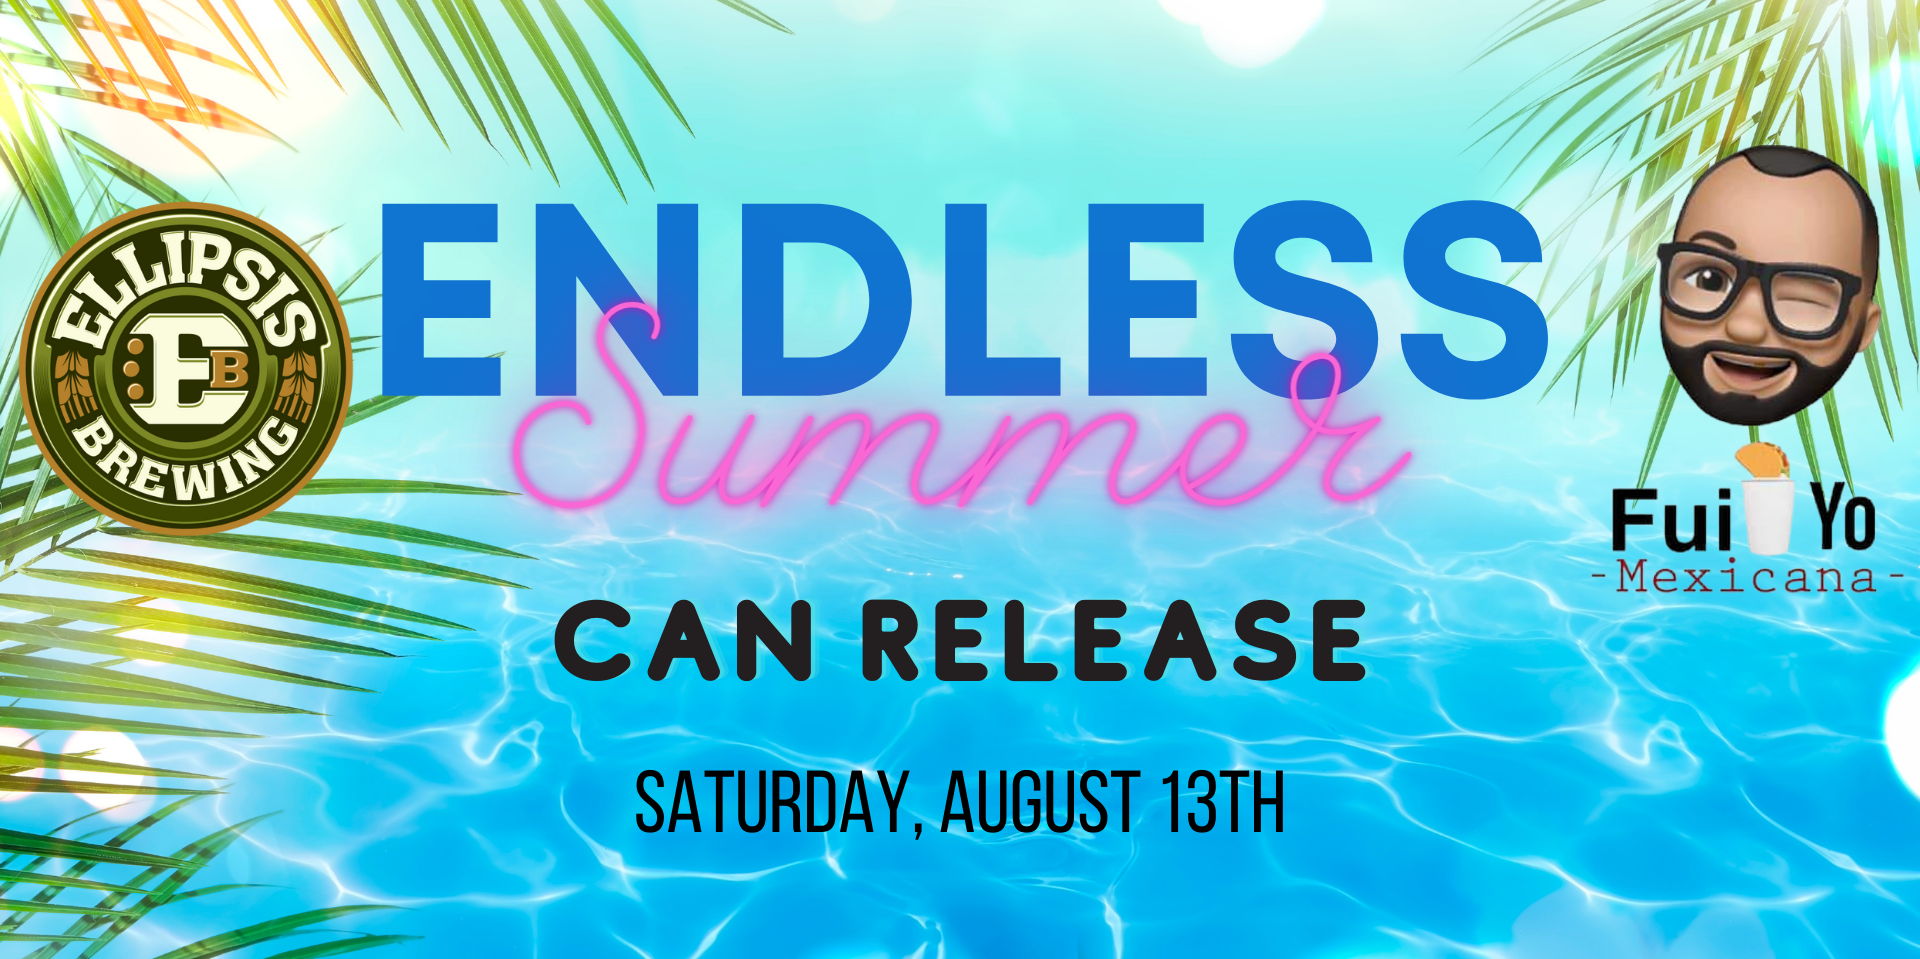 Endless Summer Can Release promotional image